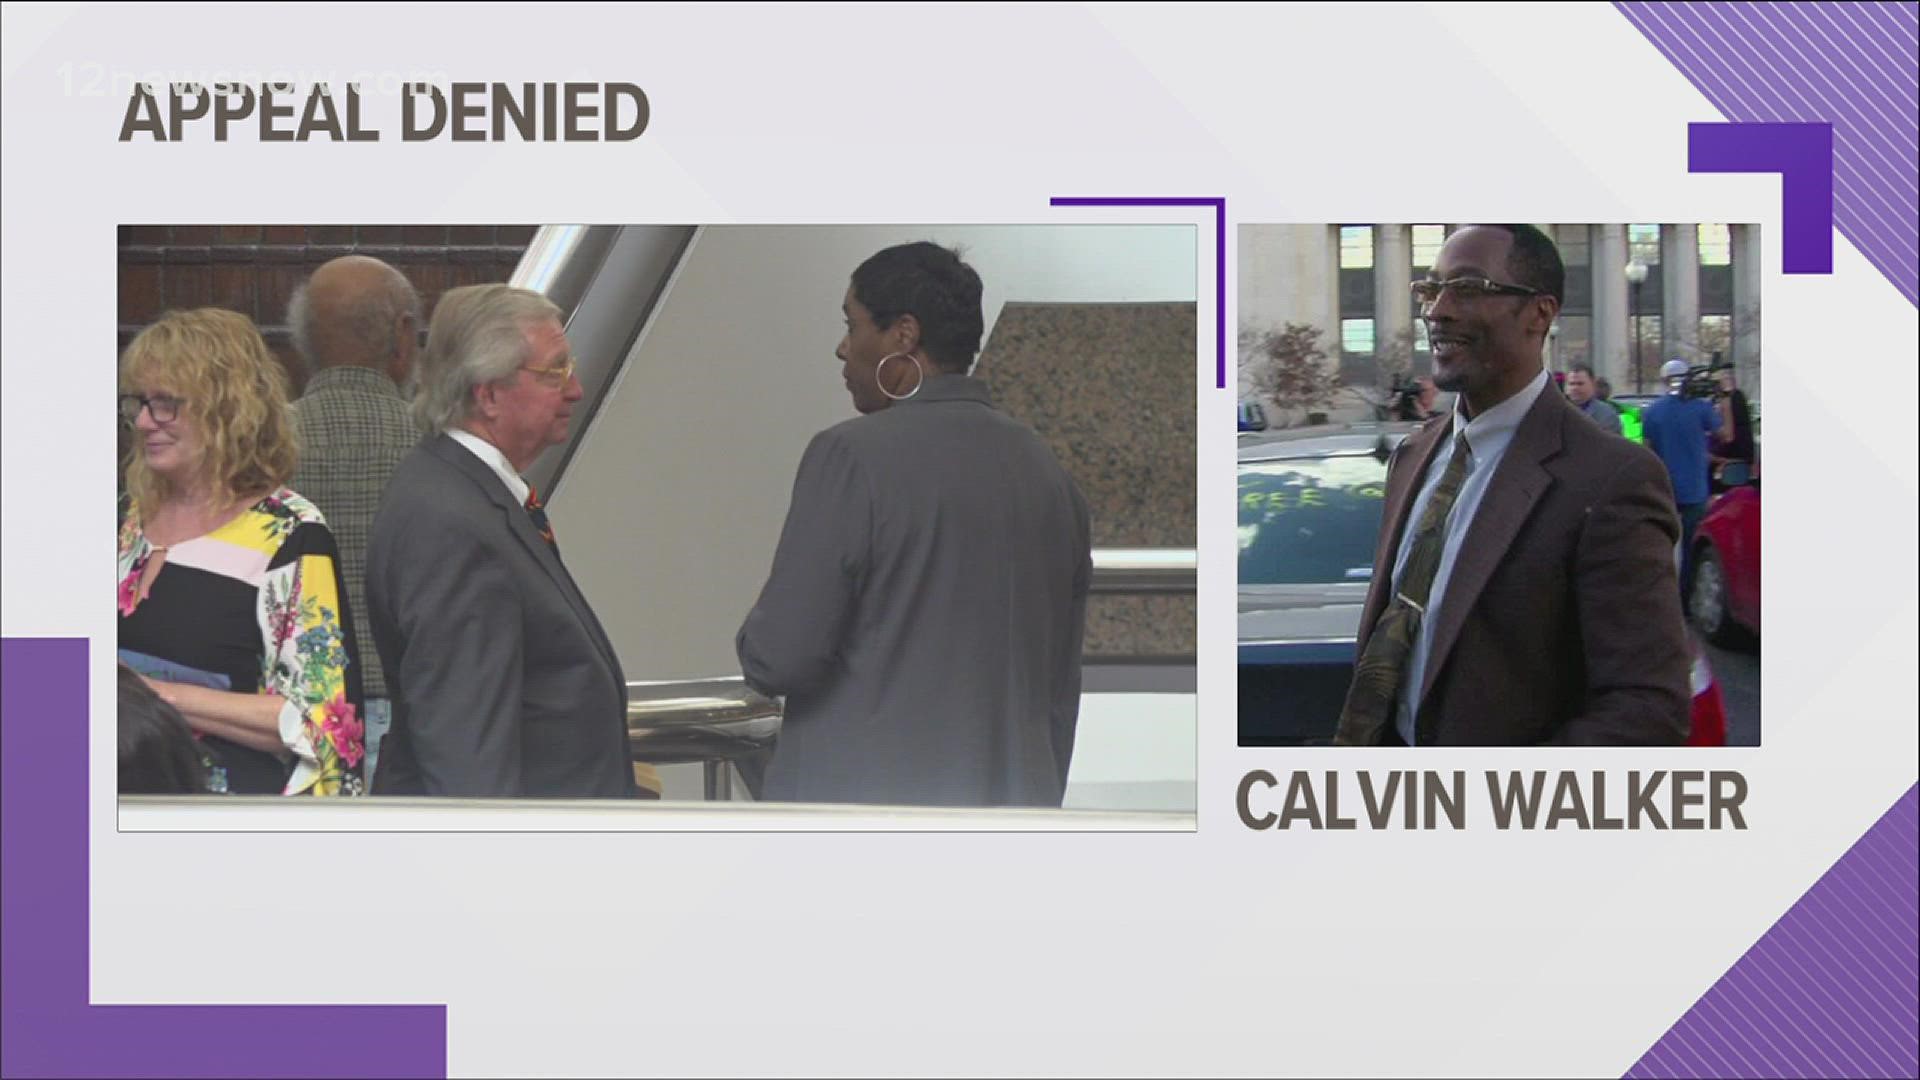 Calvin Walker was found guilty in 2019 on felony fraud charges of securing execution of a document by deception.